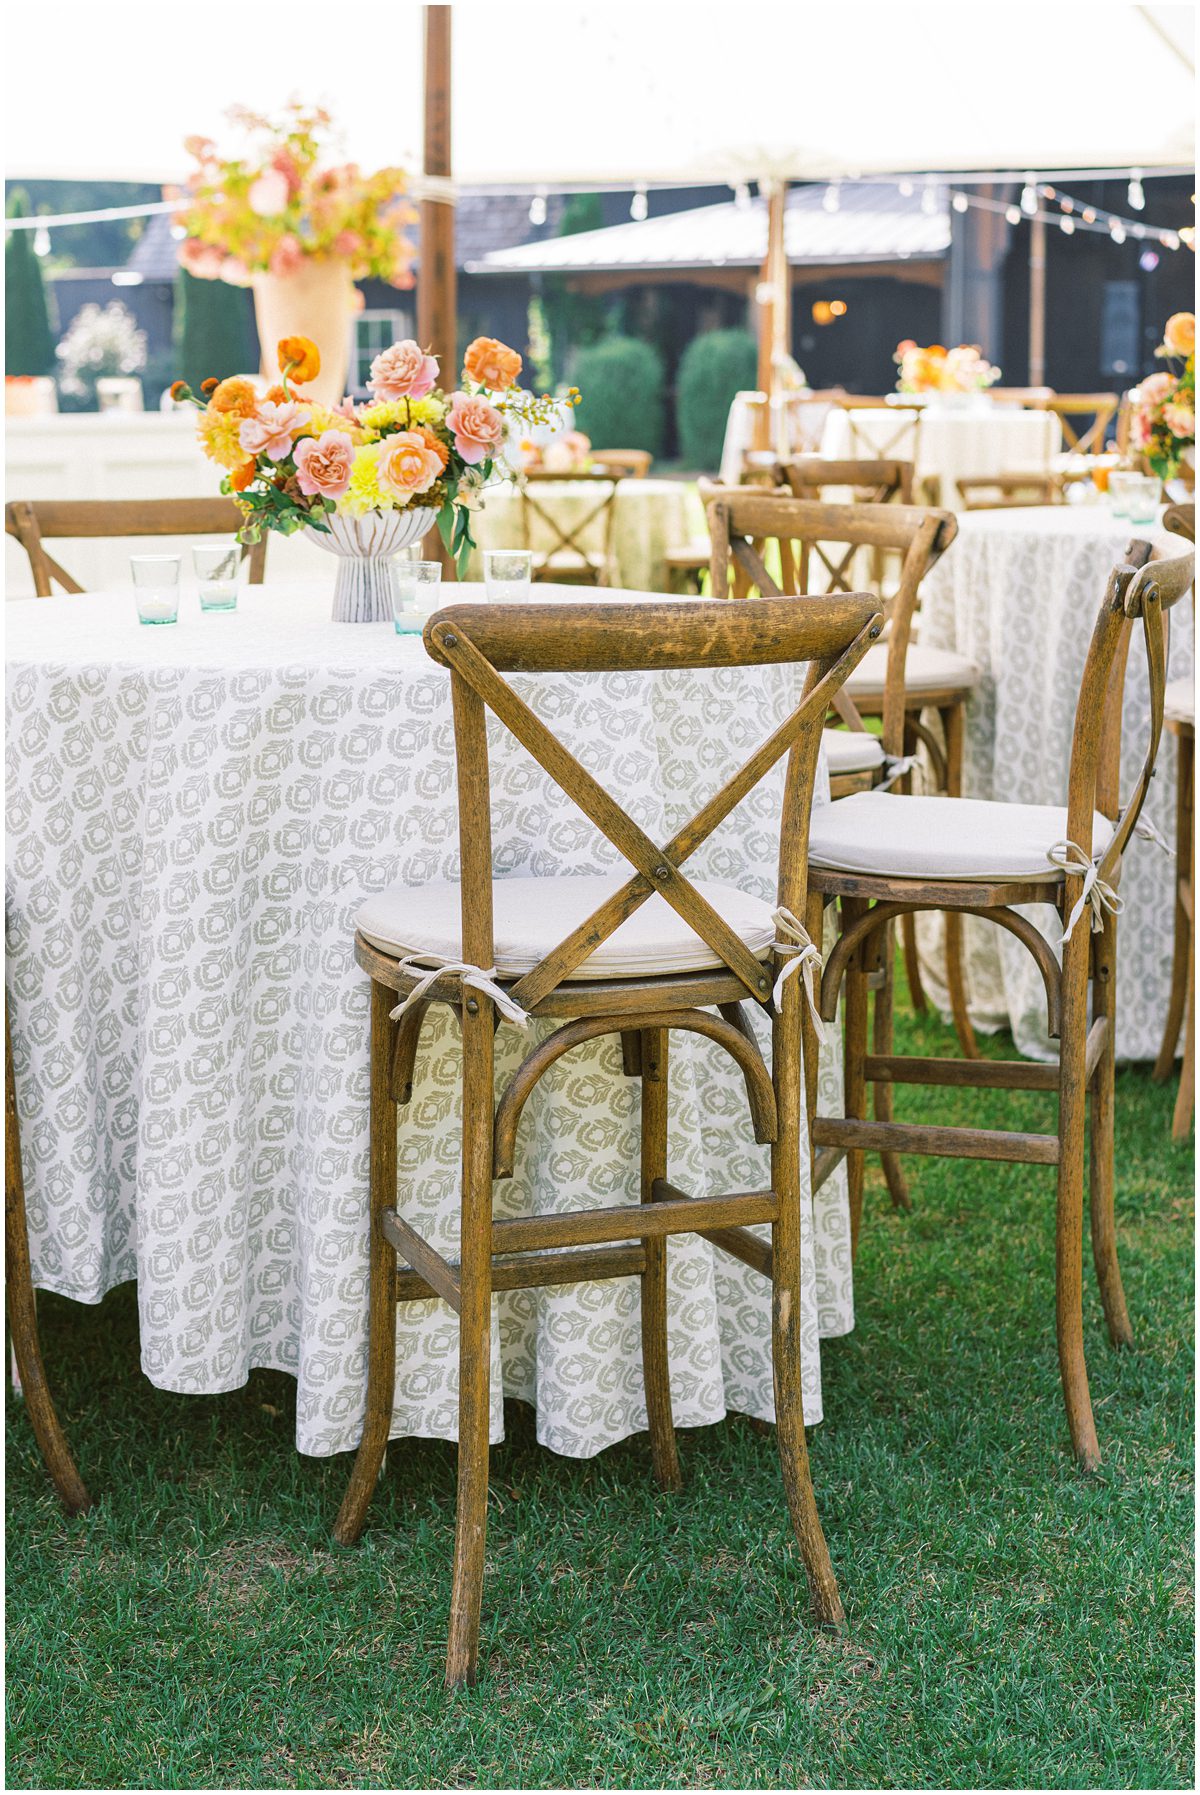 Hightop cocktail tables at a wedding with lux pattern linens, yellow, pink and orange flowers and tall wooden cross back chairs